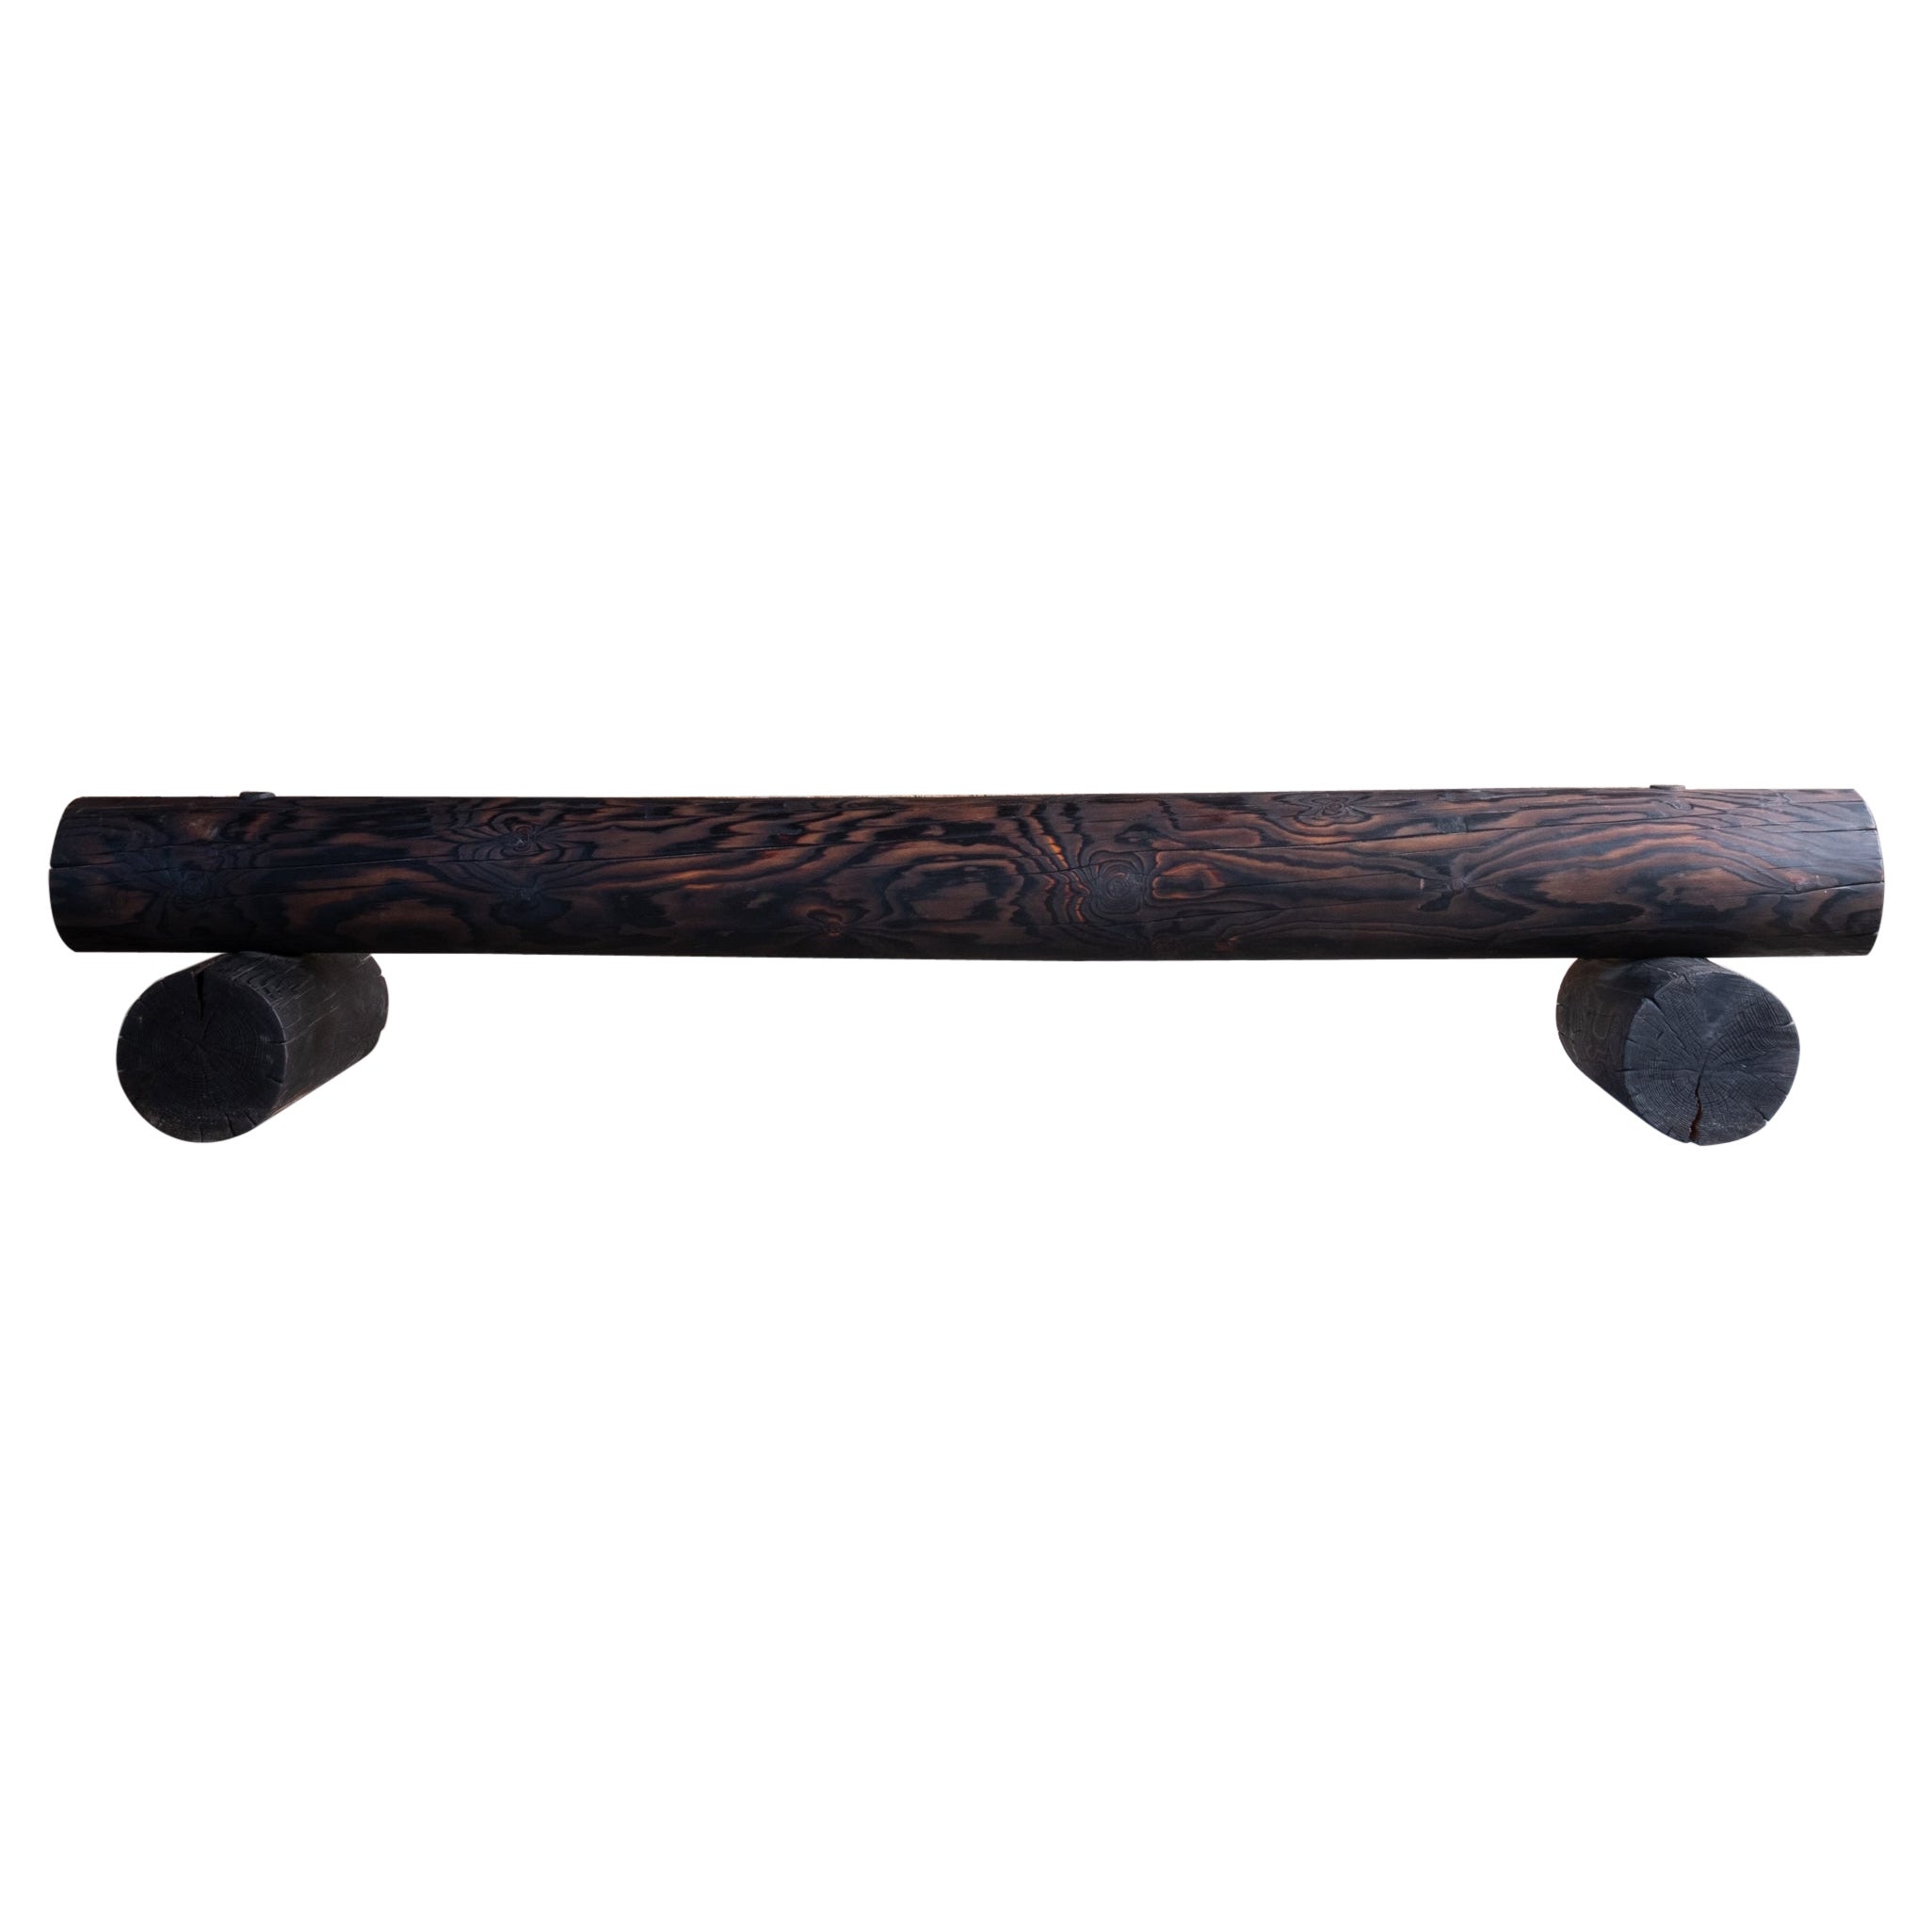 Low bench hand carved in larch and charred using the shou sugi ban tradition For Sale